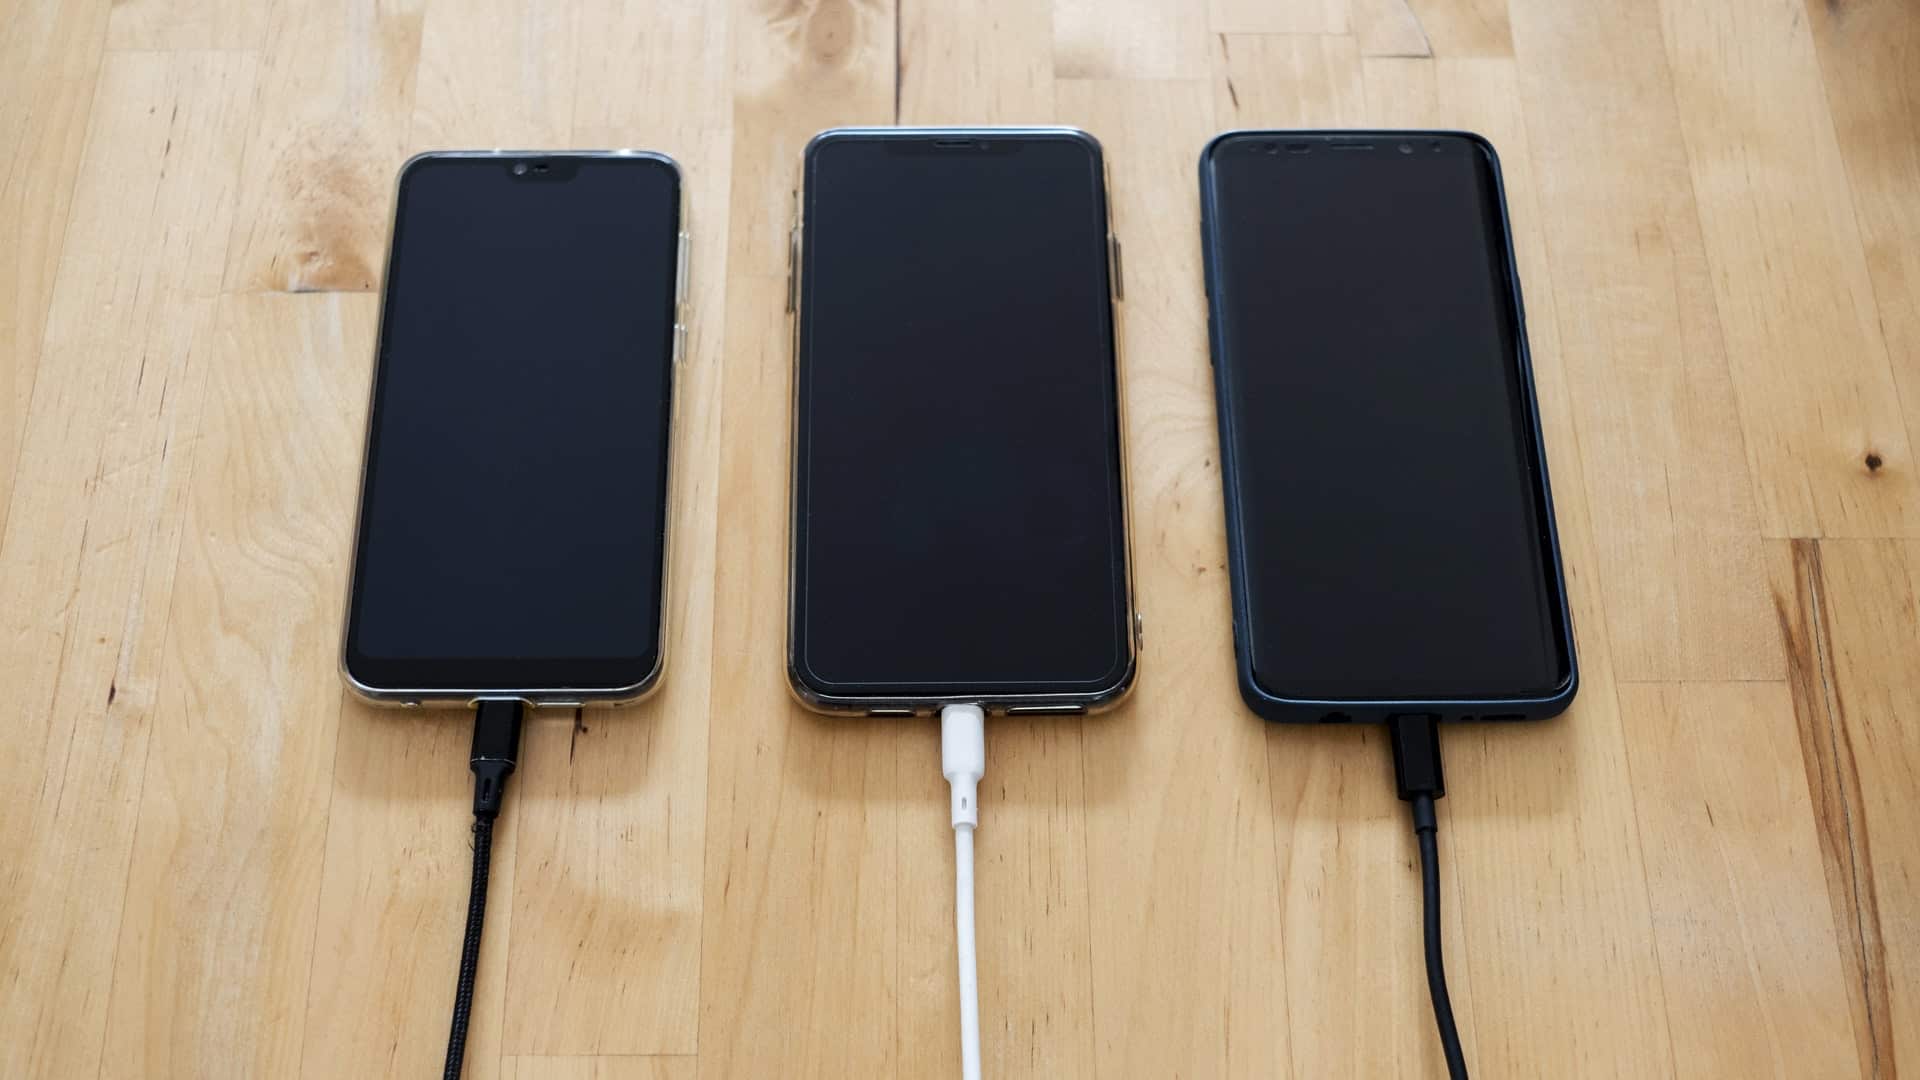 Consumers feel pinch of smartphones price hike due to chip shortage